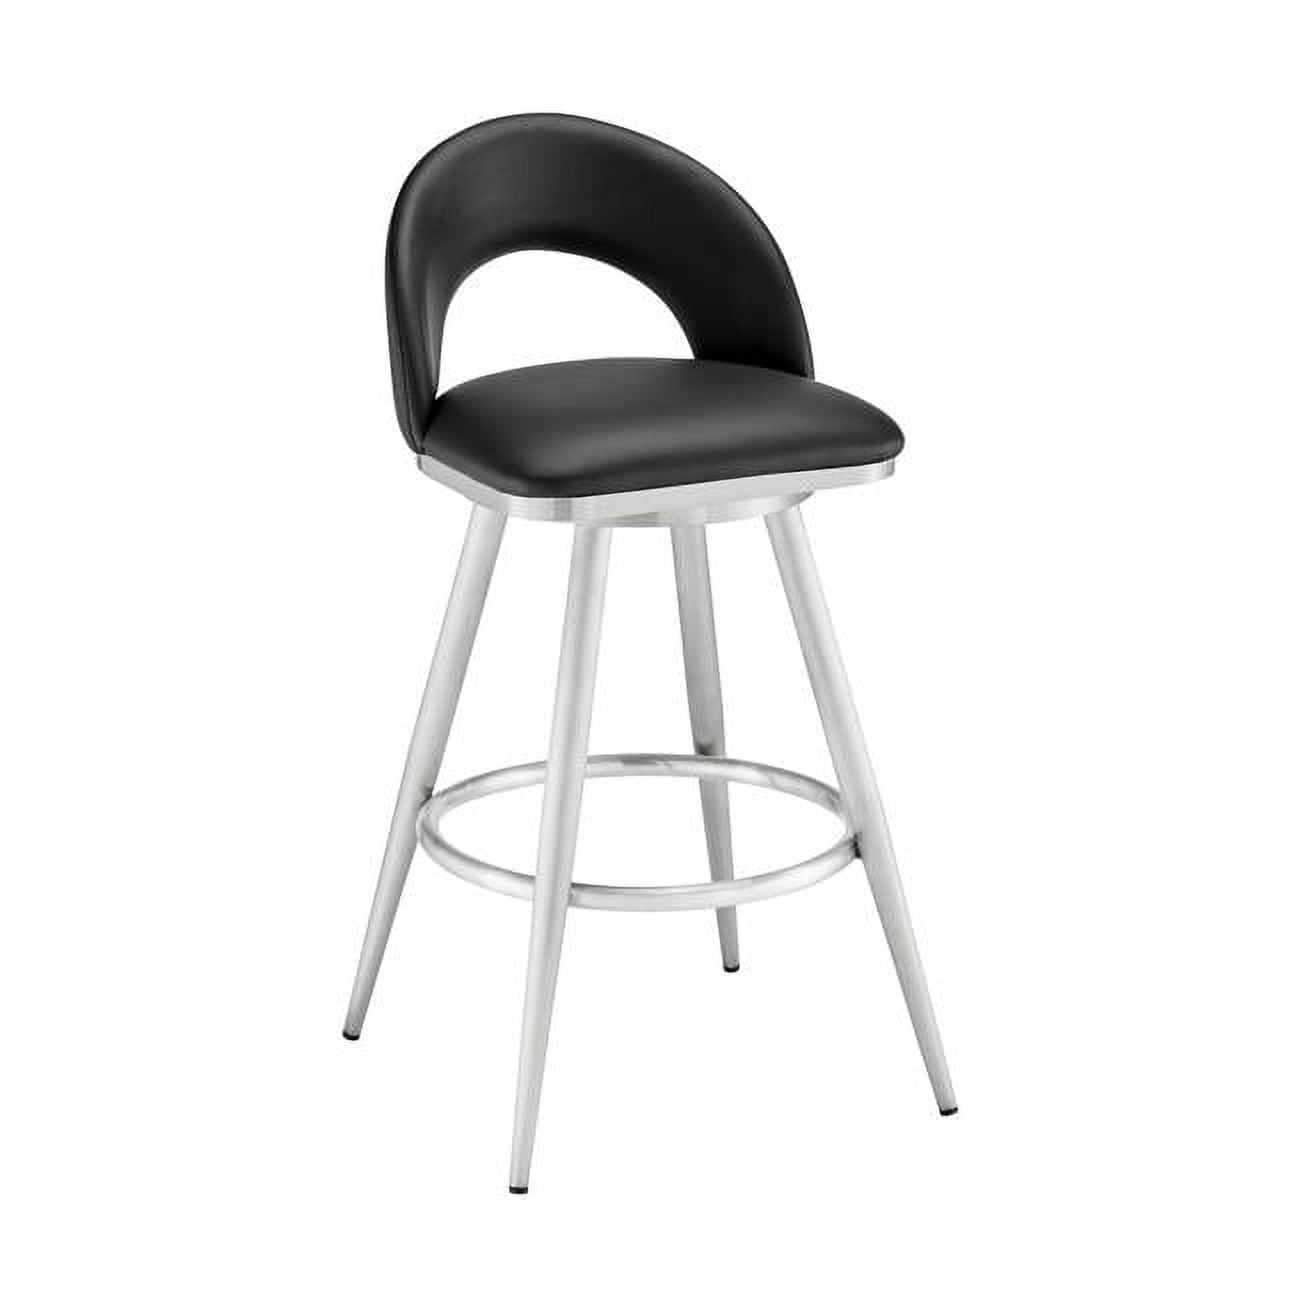 Picture of Armen Living 840254335356 34 x 17 x 20.5 in. Lottech Swivel Counter Stool in Brushed Stainless Steel & Black Faux Leather